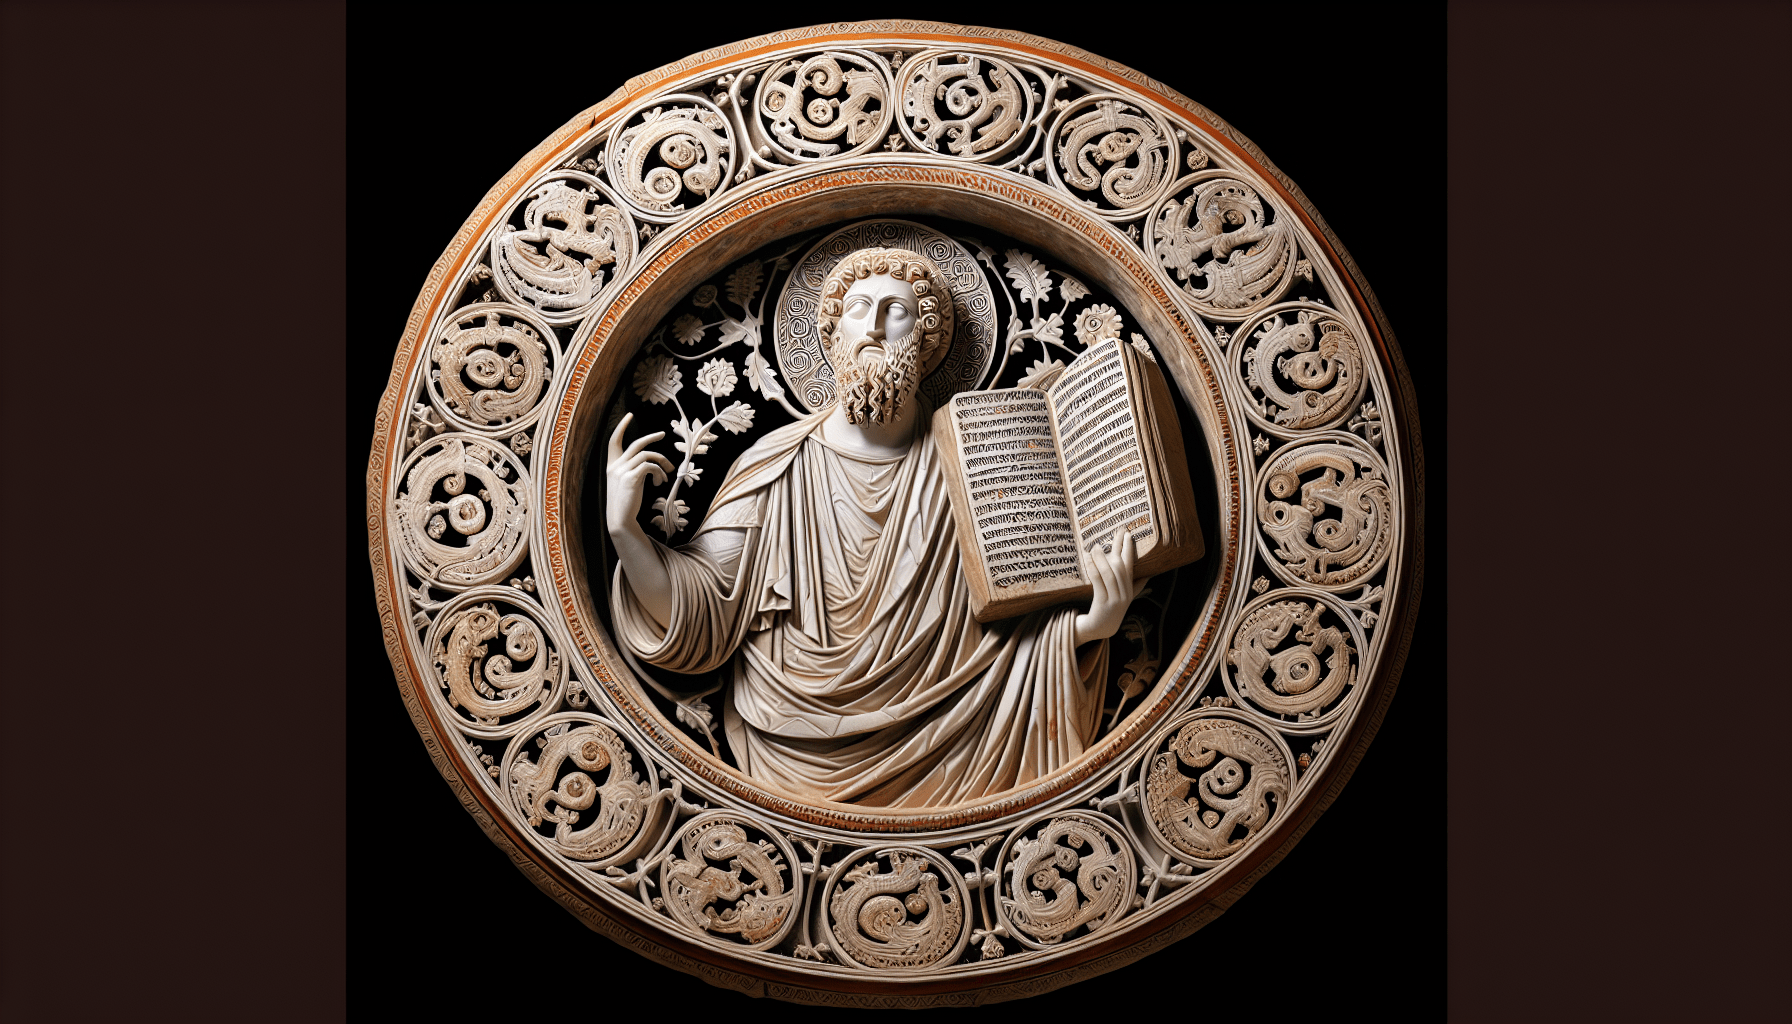 Intricately carved circular relief from Turkey featuring a robed figure with halo holding a detailed open book, surrounded by ornate floral and vine patterns.